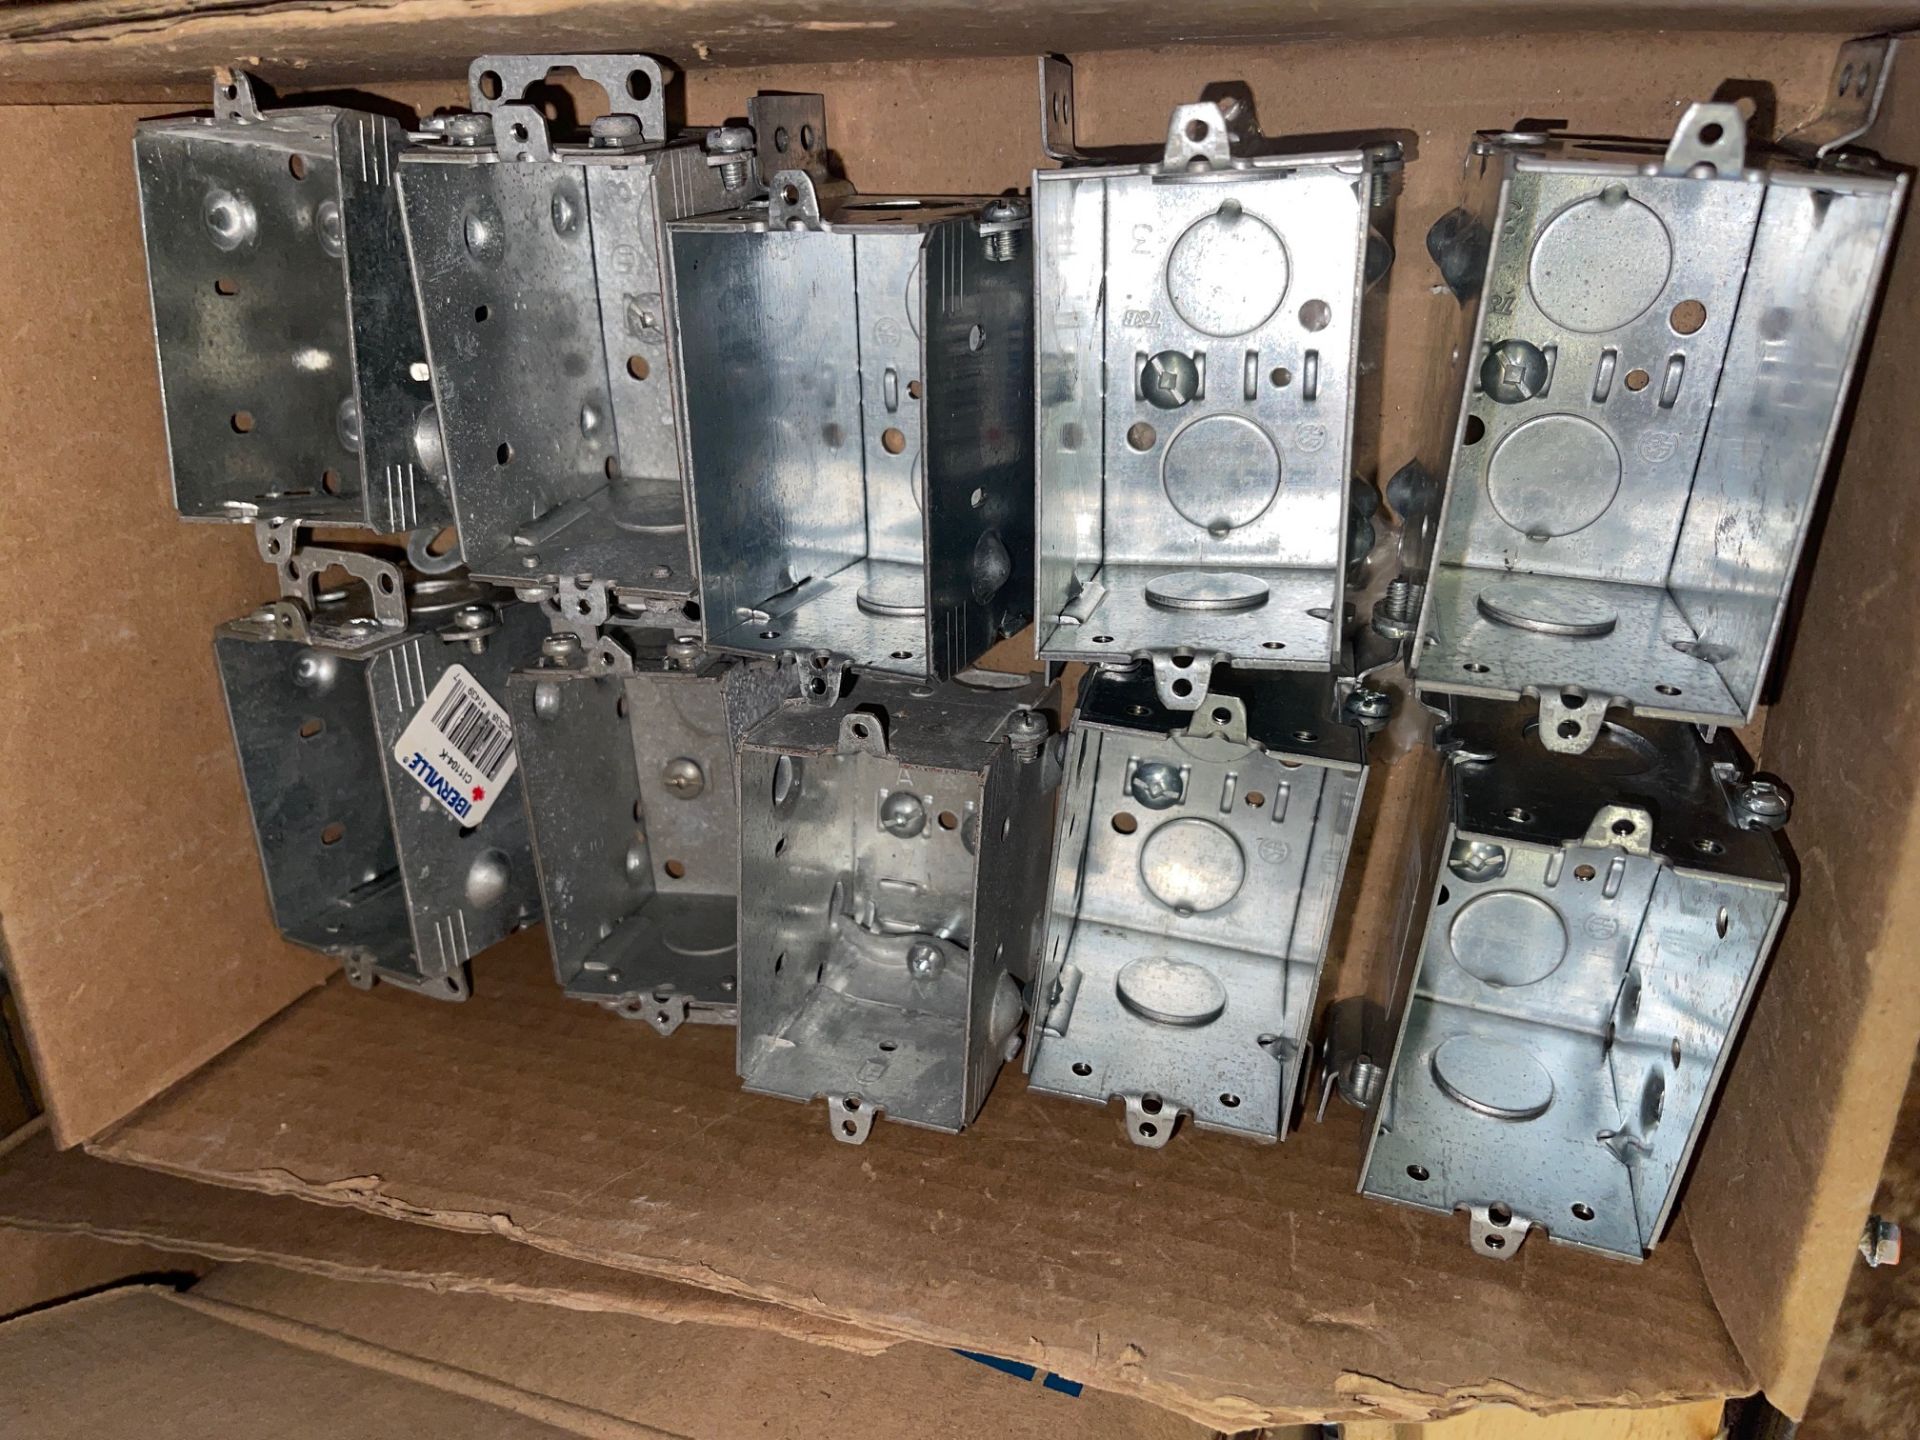 LOT/ELECTRICAL BOXES LIGHT SWITCHES BOXES (10), ALUMINUM LUG WIRES 7/8” ID 15PCS, ALUMINUM WIRE - Image 5 of 5